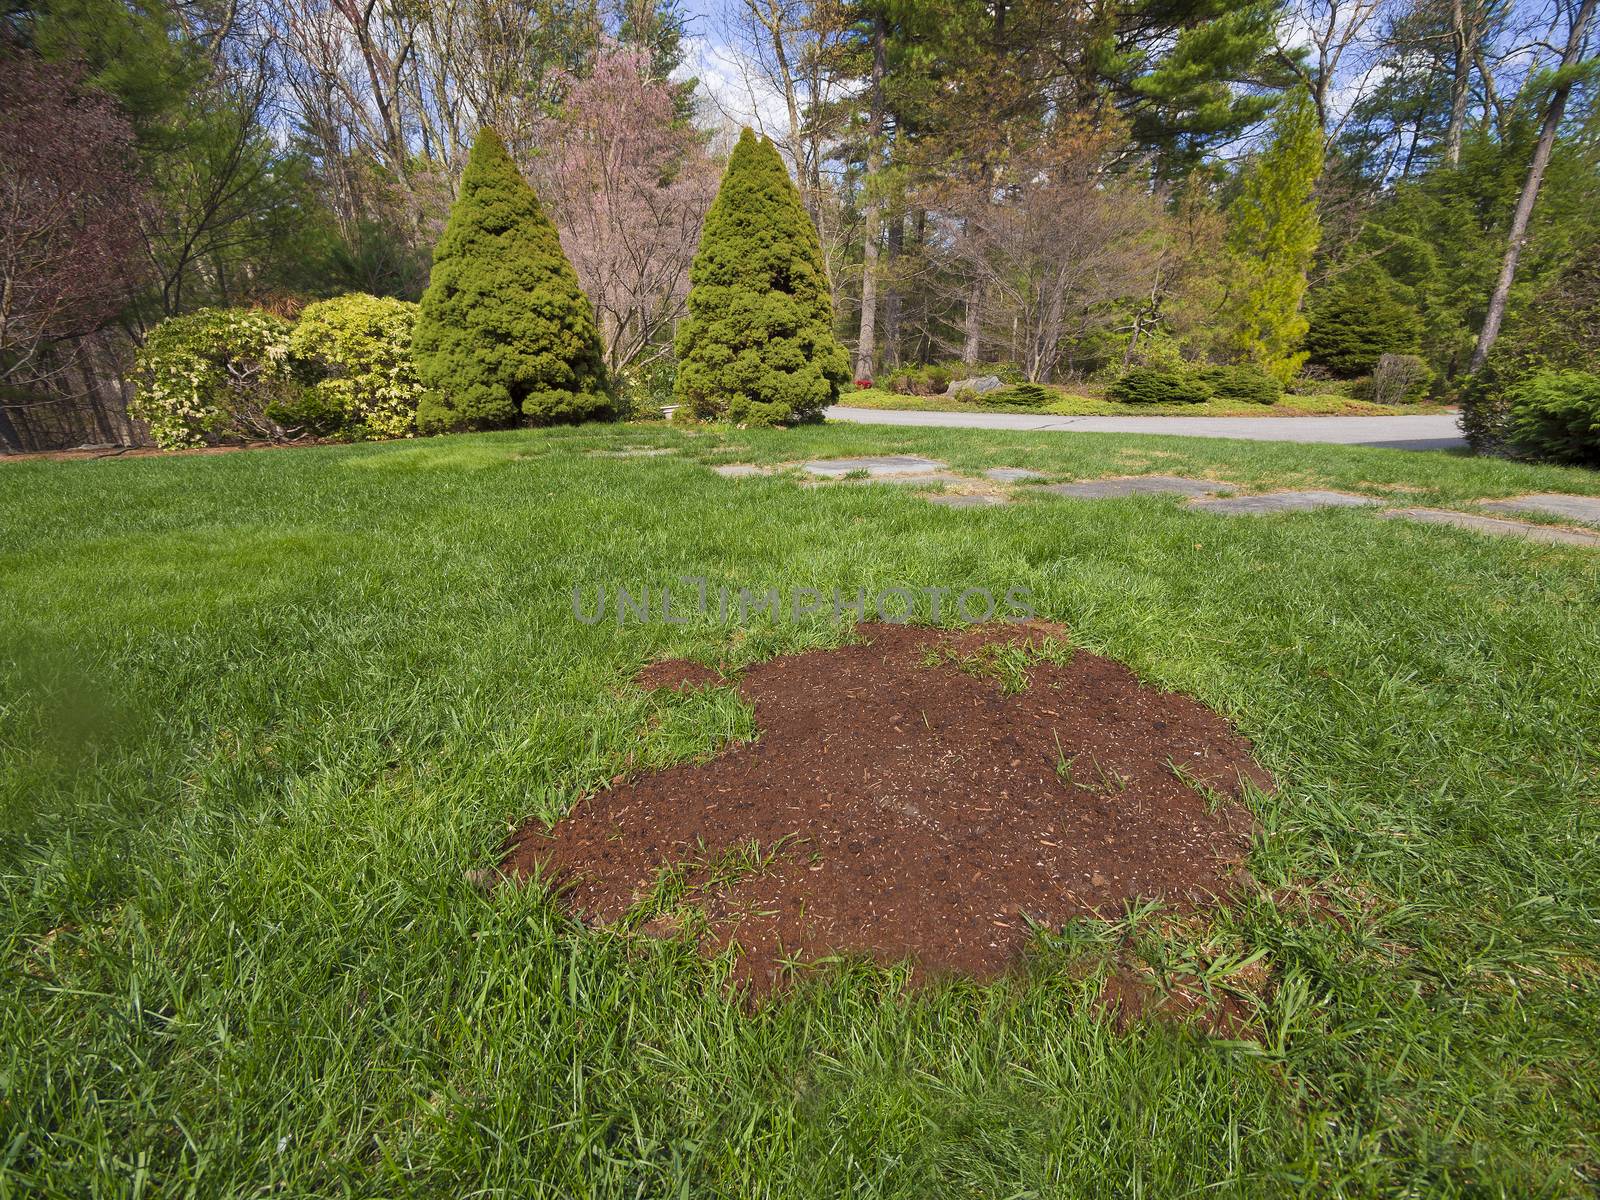 Seeding a patch of lawn after the ravages of a disease or frost burn